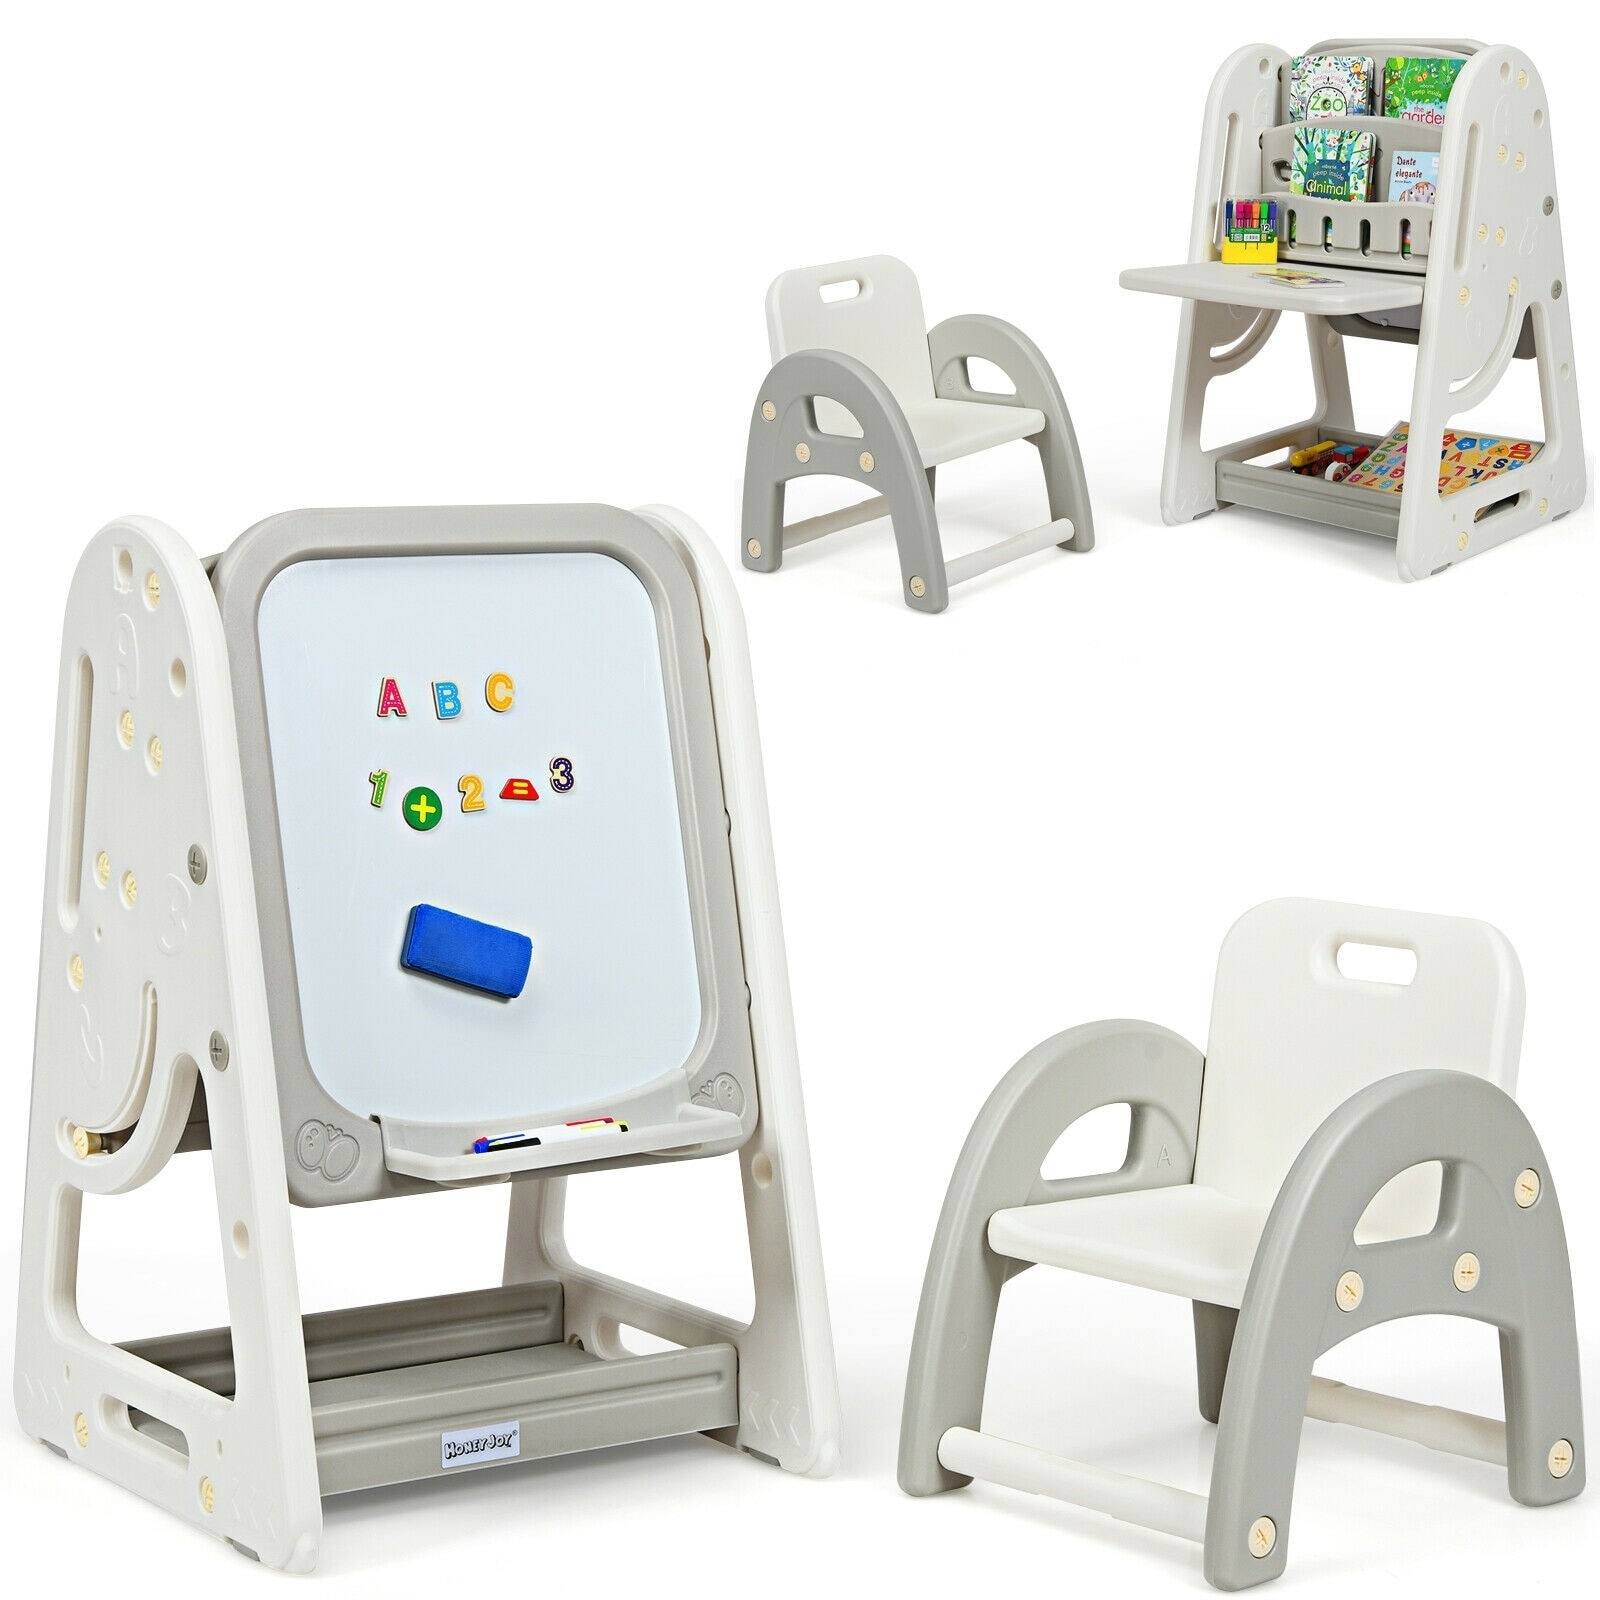 https://ak1.ostkcdn.com/images/products/is/images/direct/c5ee5404fc4be8a9592abda8d3ee9ec11c930ca2/2-in-1-Kids-Easel-Desk-Chair-Set-Book-Rack-Adjustable-Art-Painting-Board.jpg